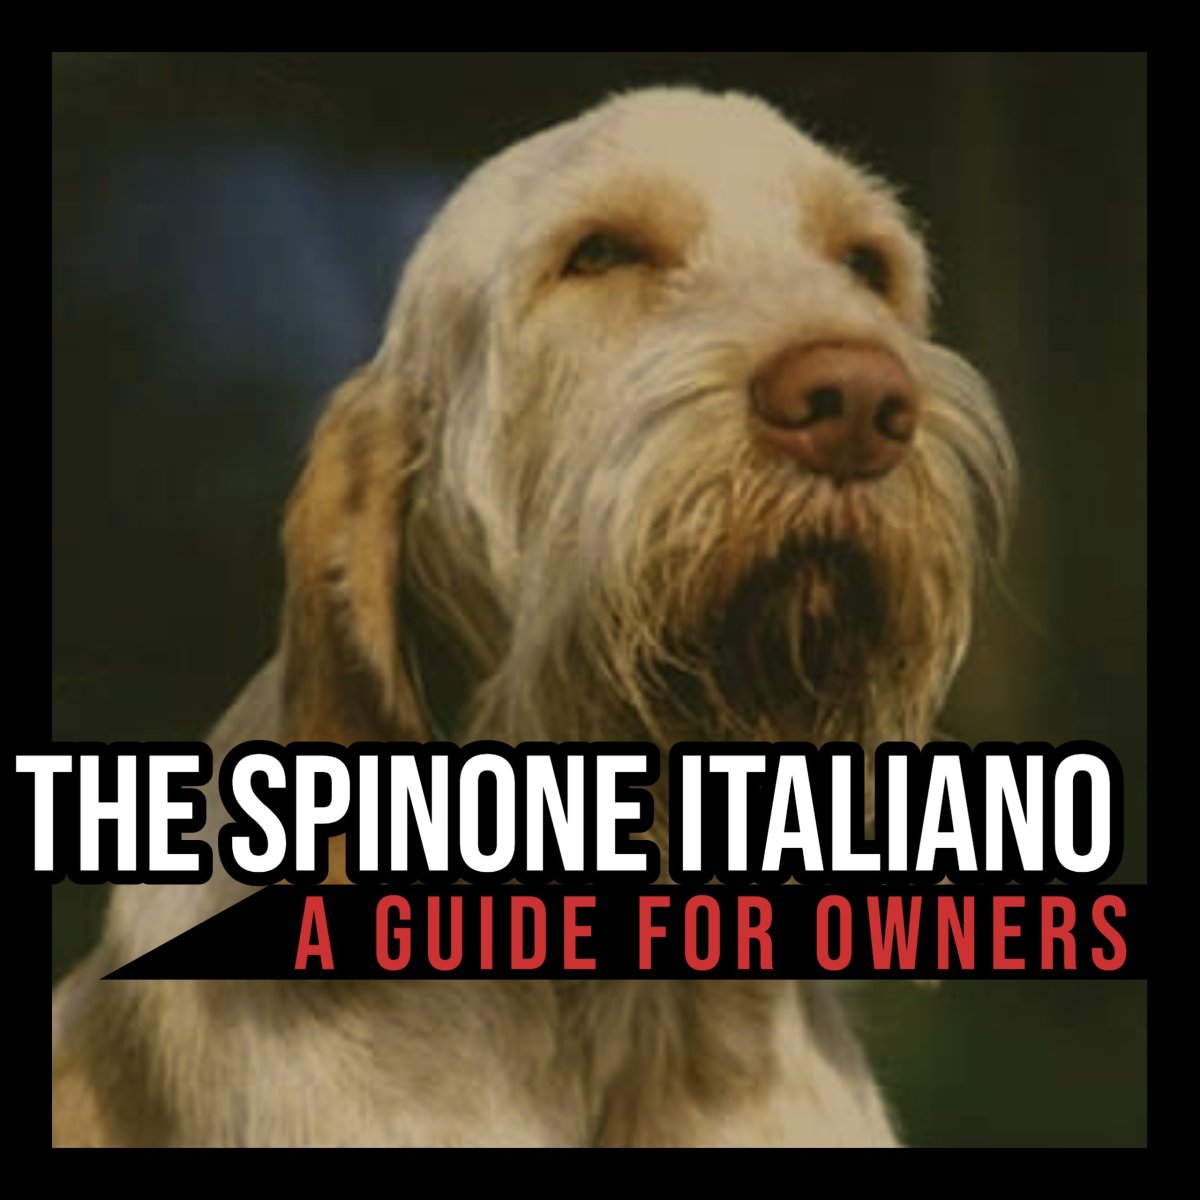 The Spinone Italiano: A Guide for Owners.